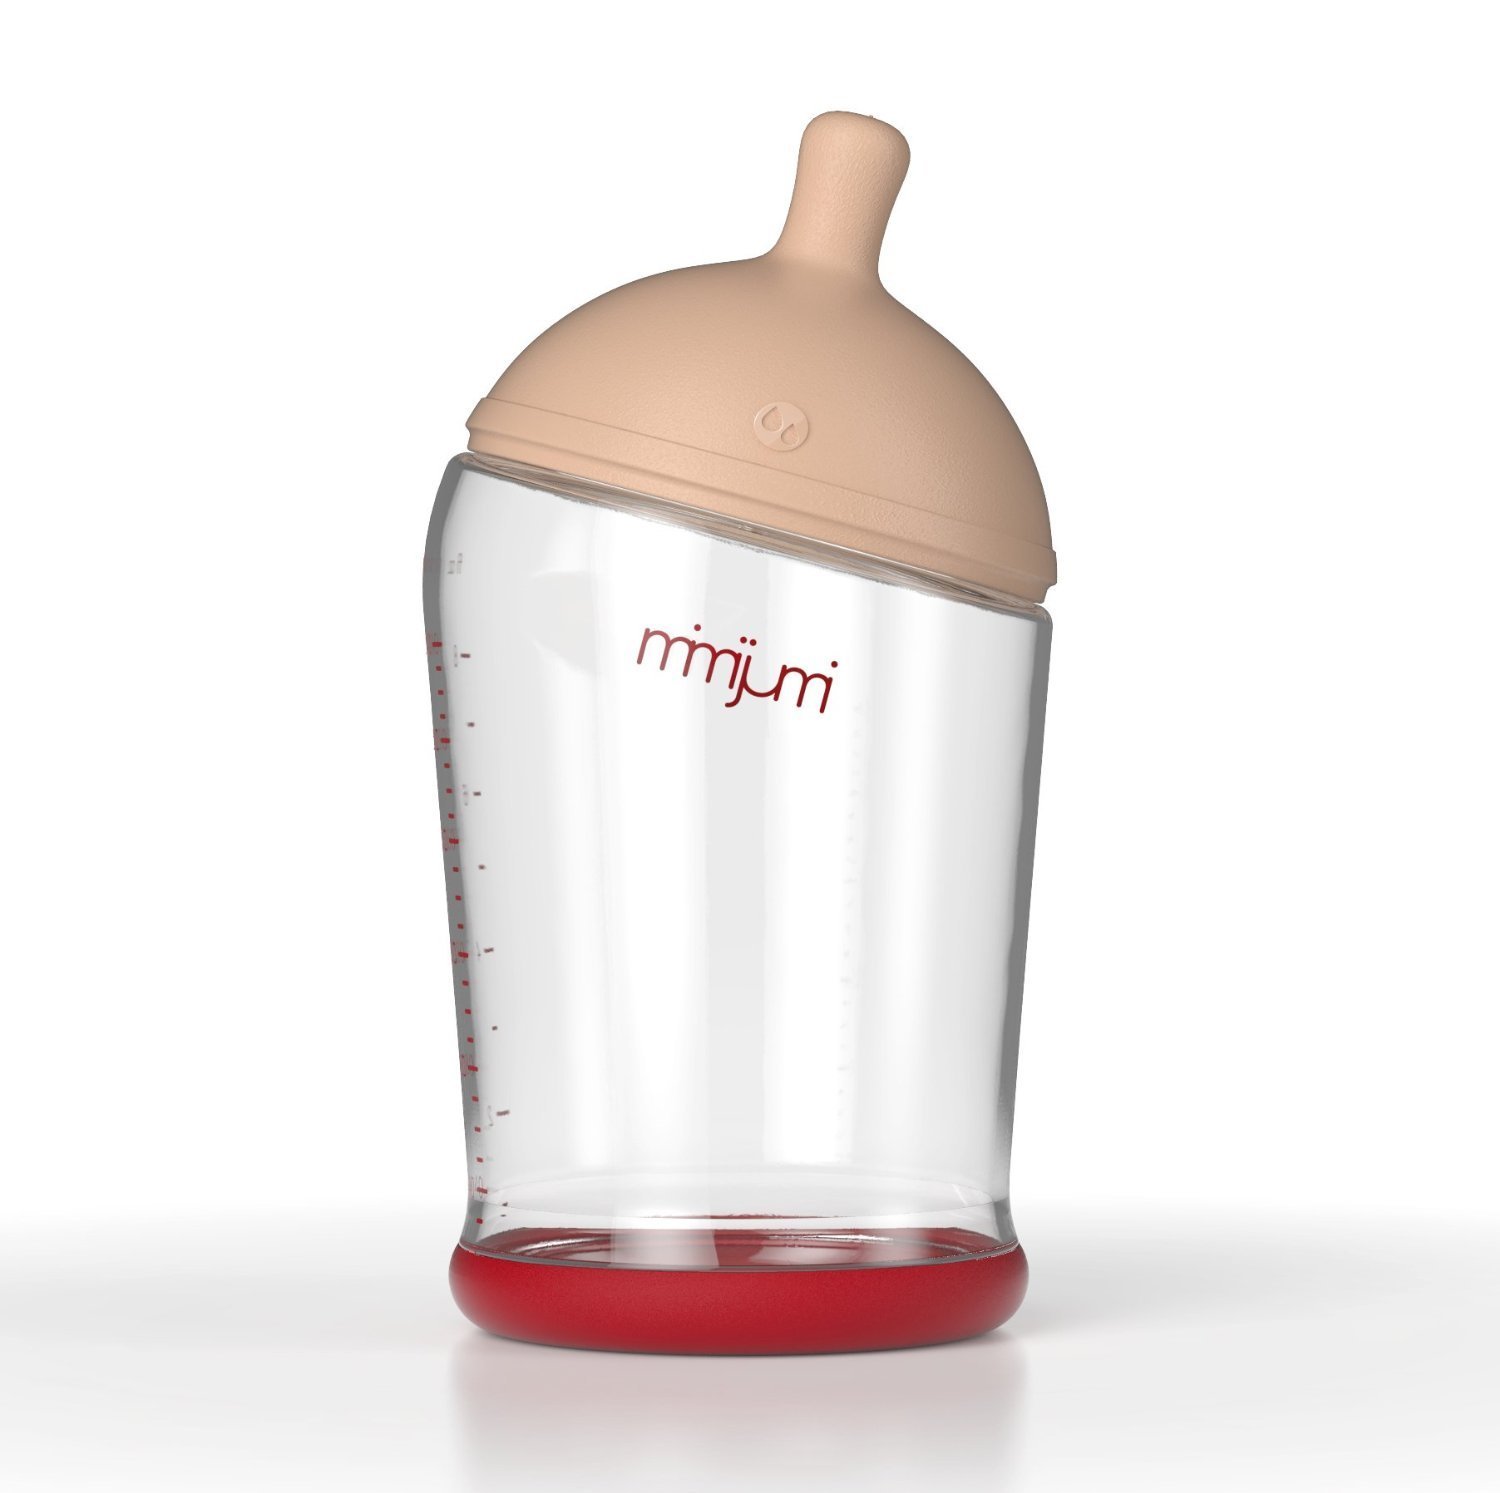 mimijumi baby bottle, very hungry baby bottle, best bottles for breastfed babies, bottles for breastfed babies